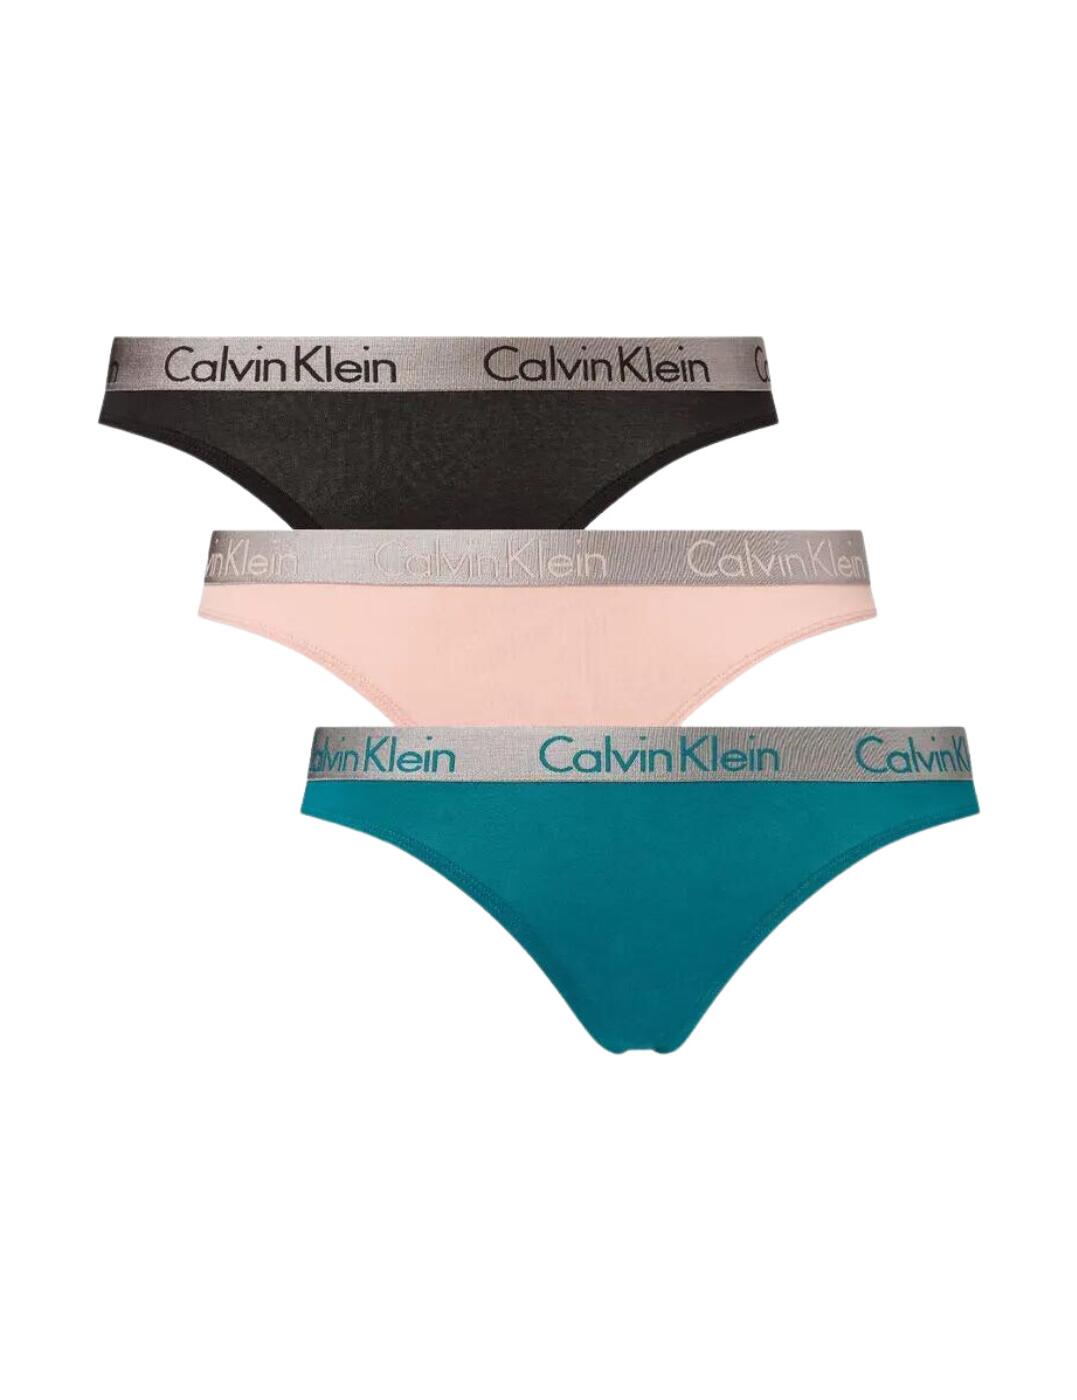 Calvin Klein Radiant Cotton Thong 3 Pack Turtle Bay/Black/Cherry Blossom